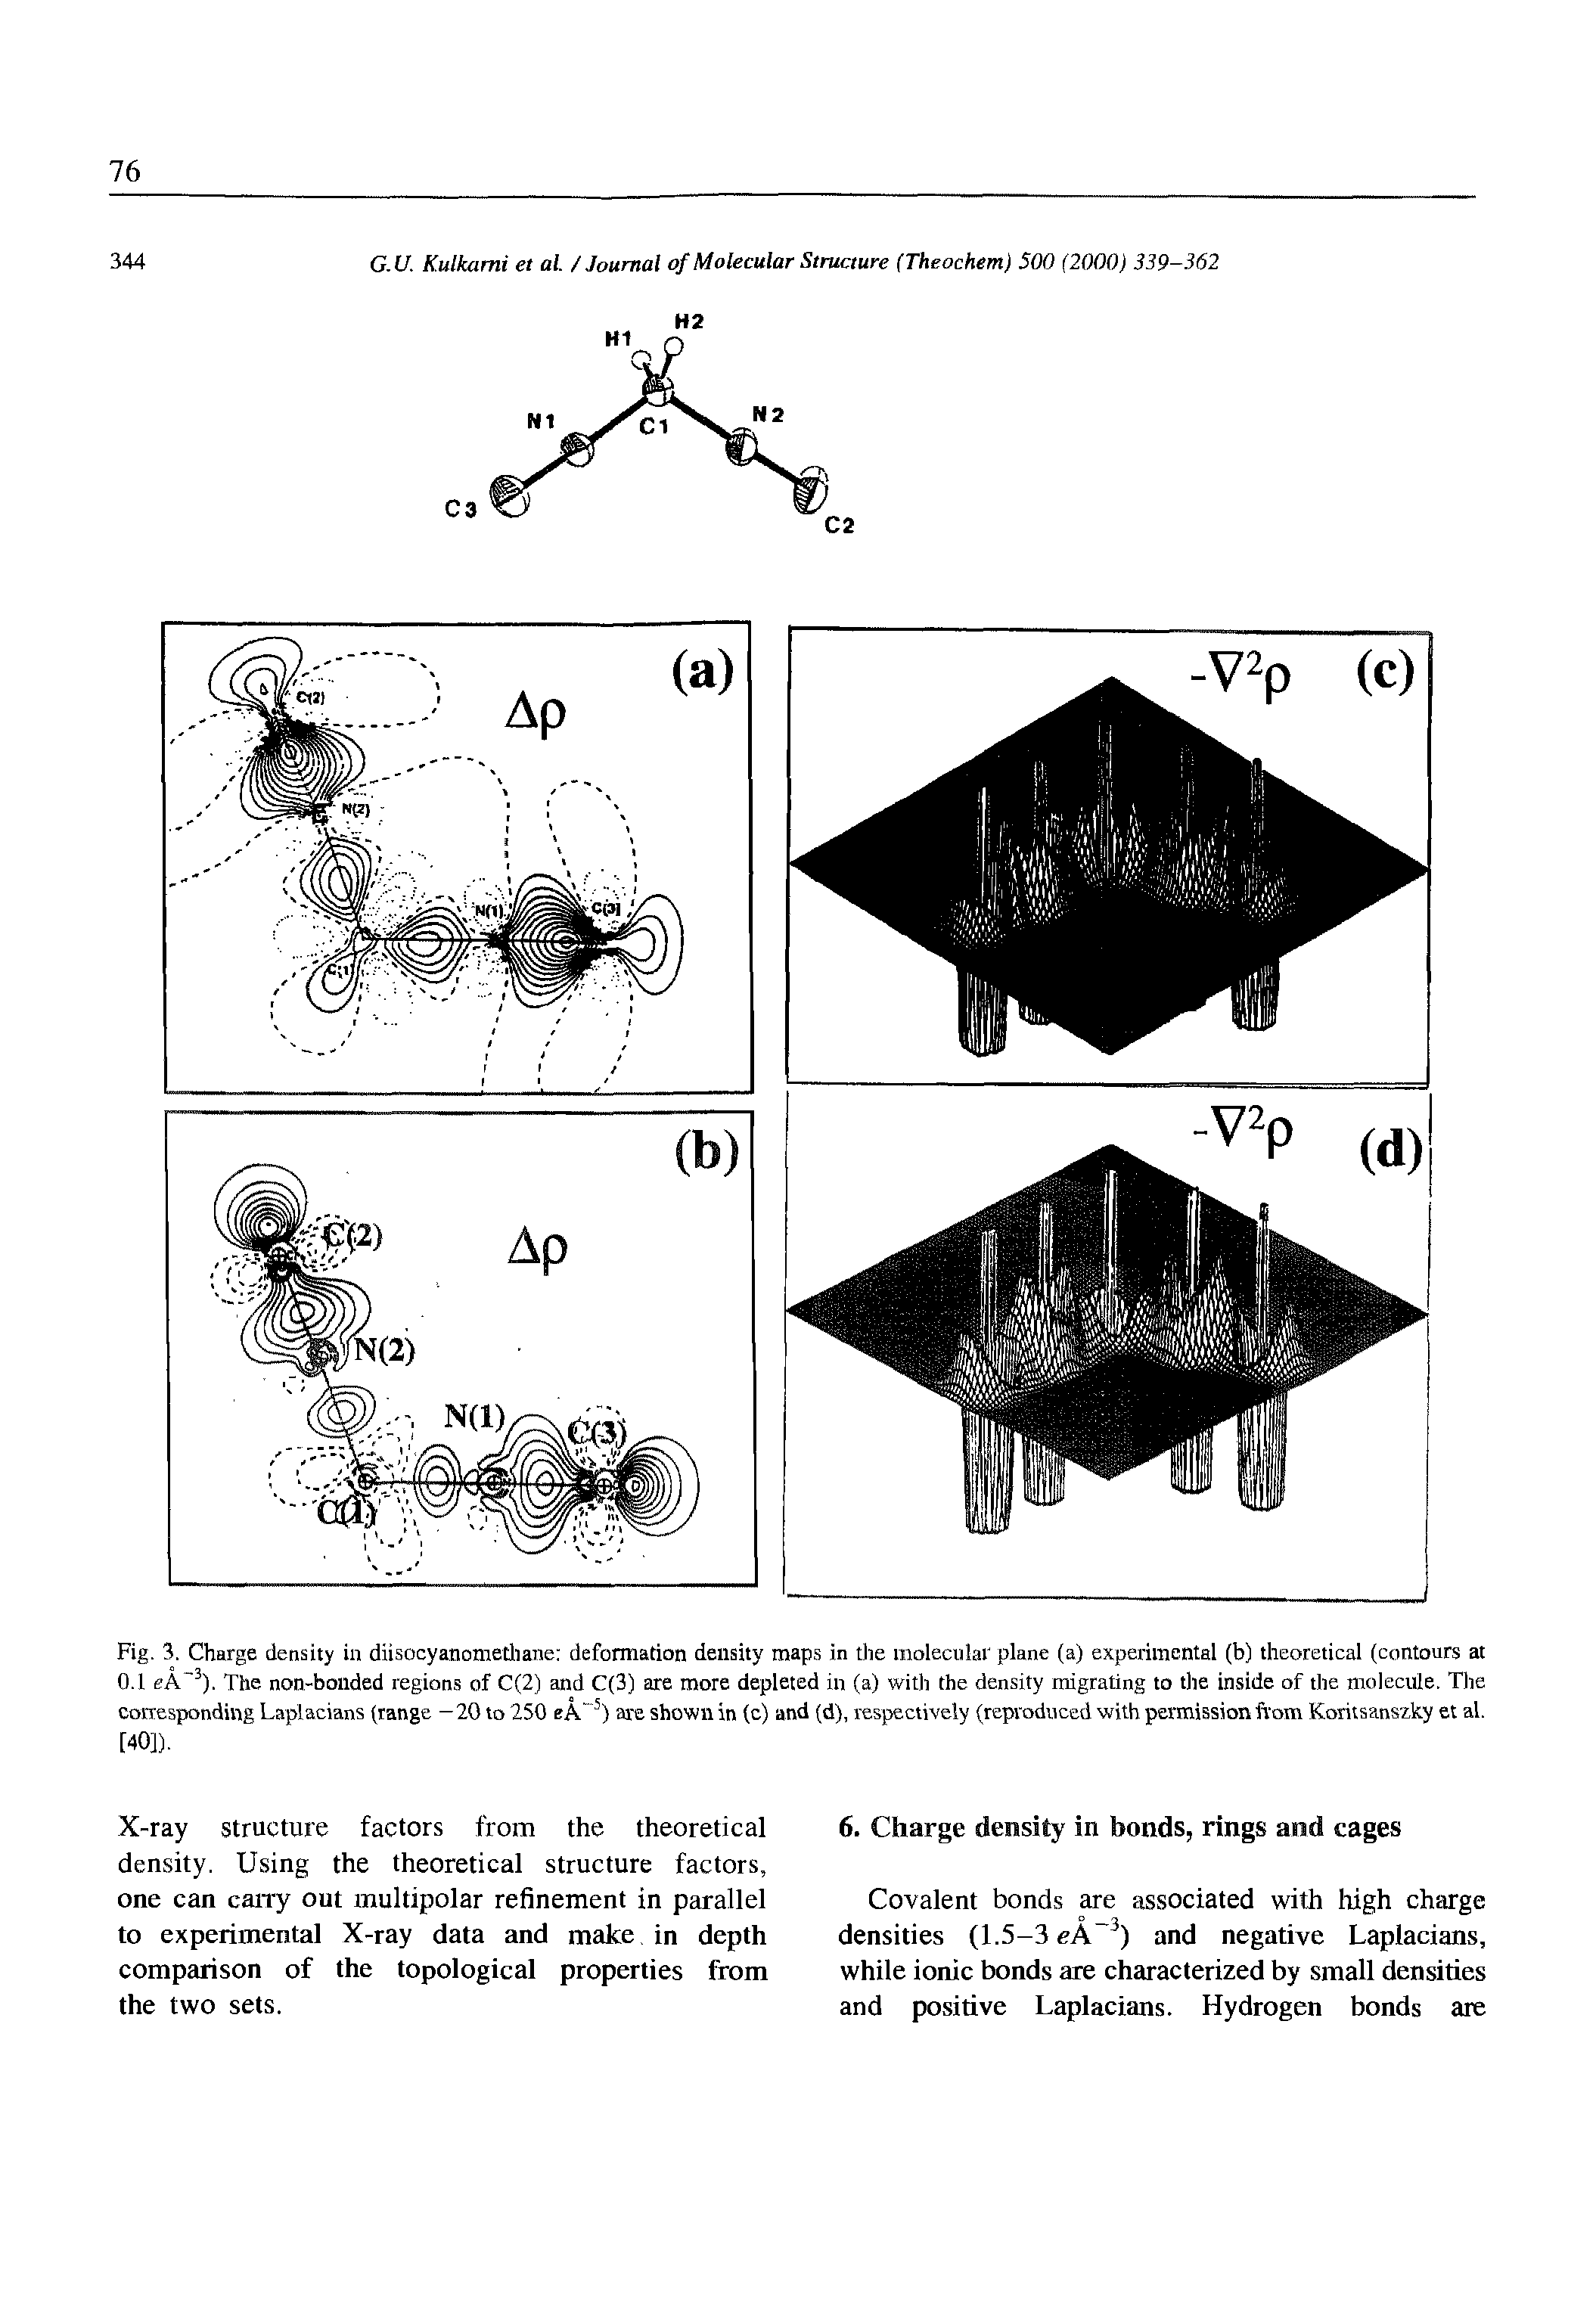 Fig. 3. Charge density ill diisocyanomethane deformation density maps in die molecular plane (a) experimental (b) theoretical (contours at 0.1 t A-3). The non-bonded regions of C(2) and C(3) are more depleted in (a) with the density migrating to the inside of the molecule. The corresponding Laplacians (range - 20 to 250 eA"5) are shown in (c) and (d), respectively (reproduced with permission from Koritsanszky et al.